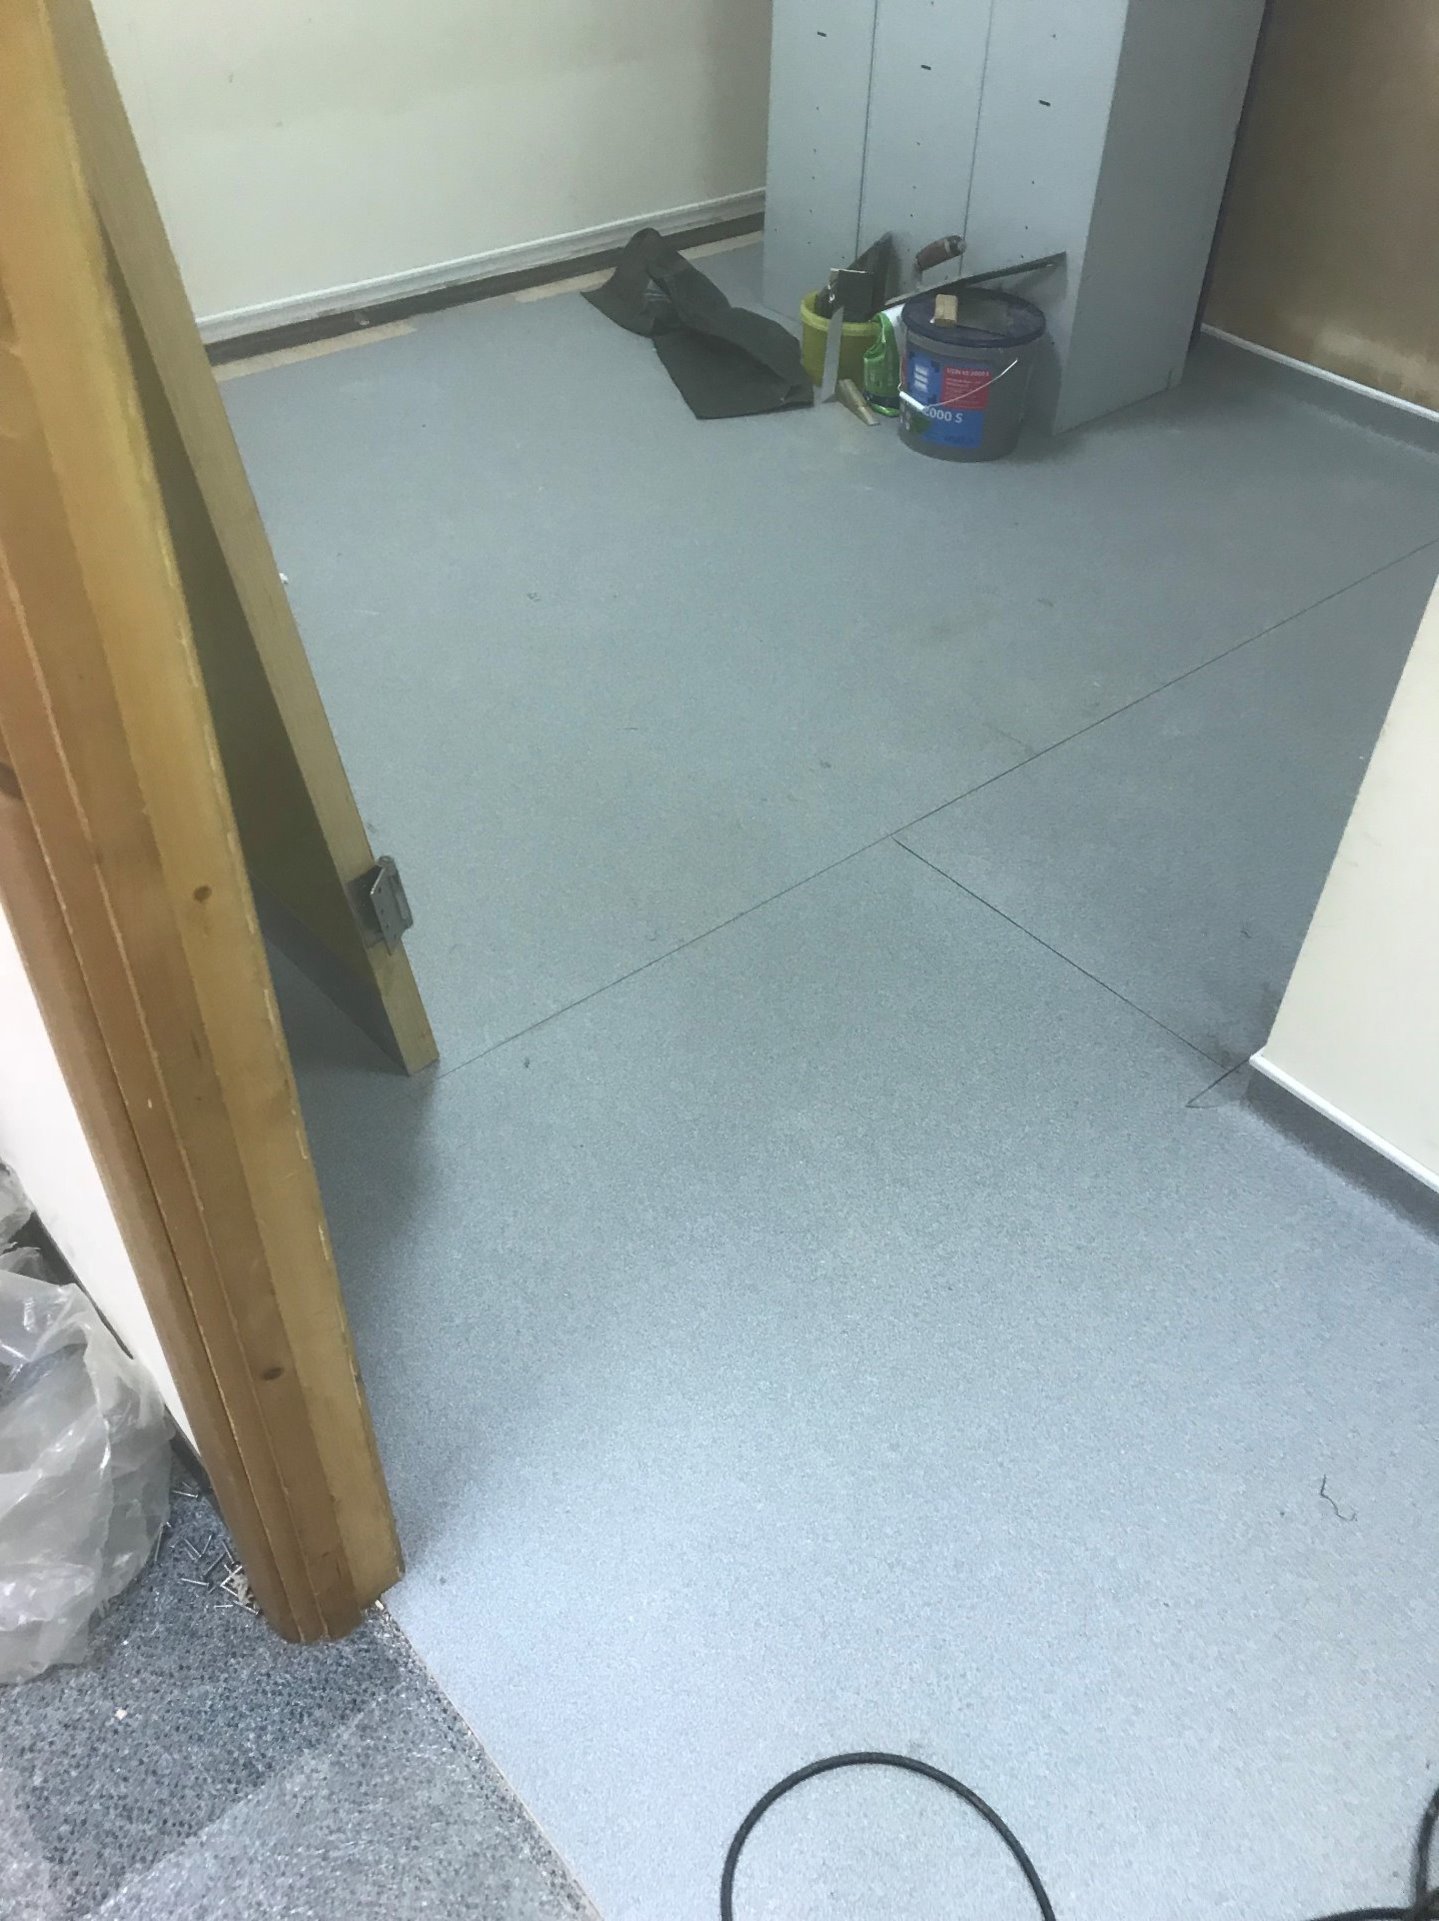 New flooring finish being installed